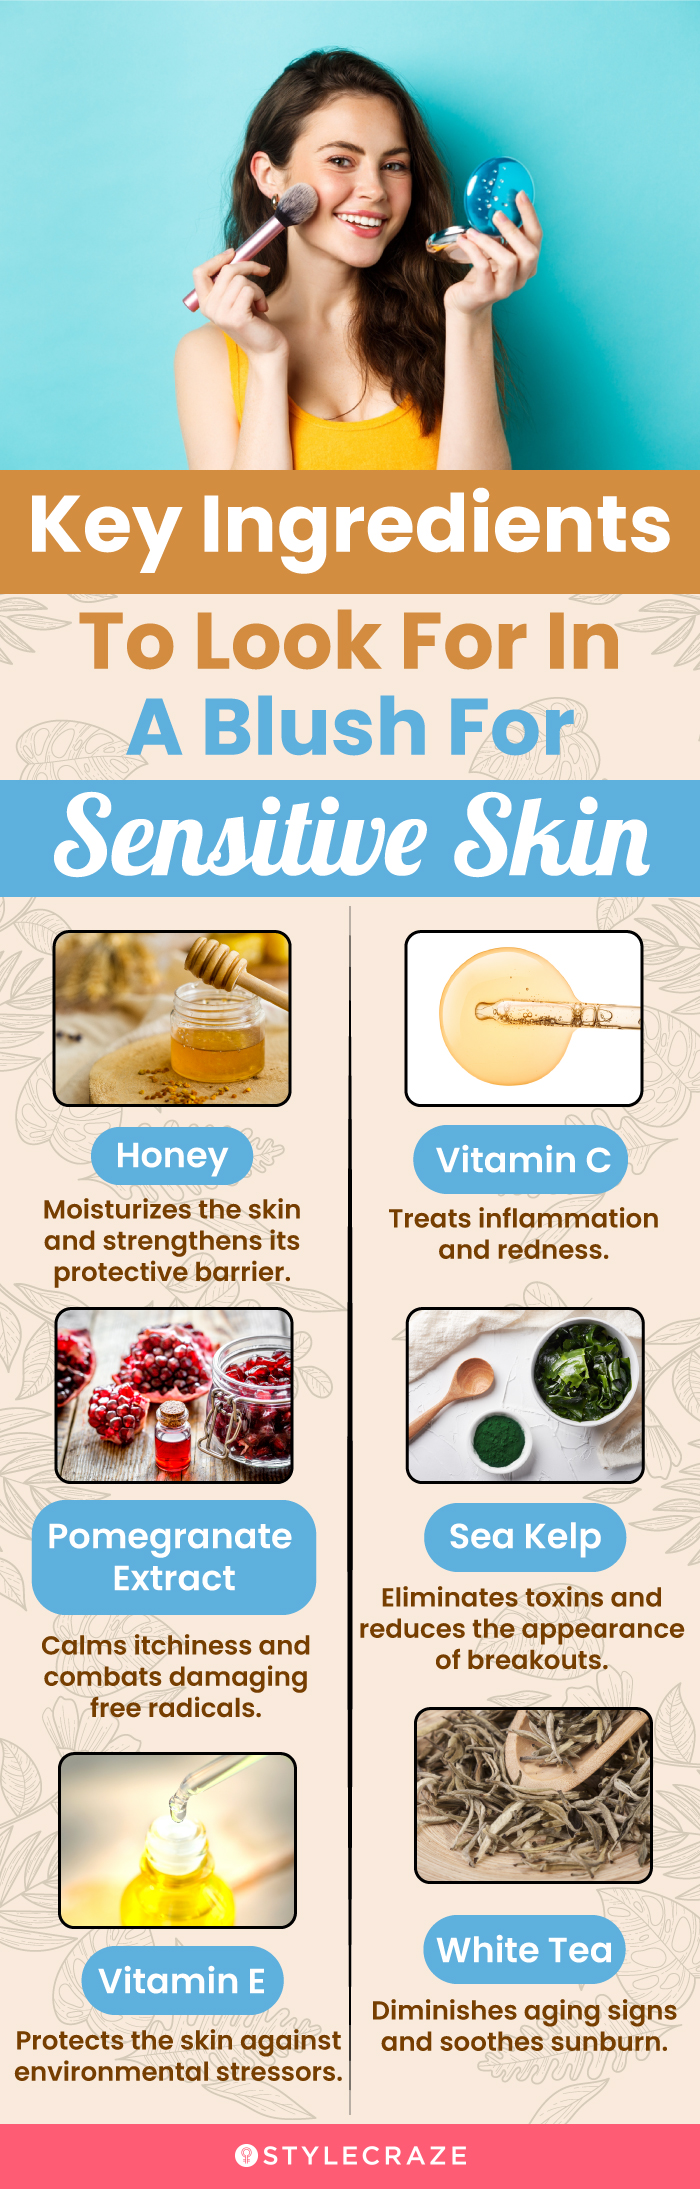 Key Ingredients To Look For In A Blush For Sensitive Skin (infographic)